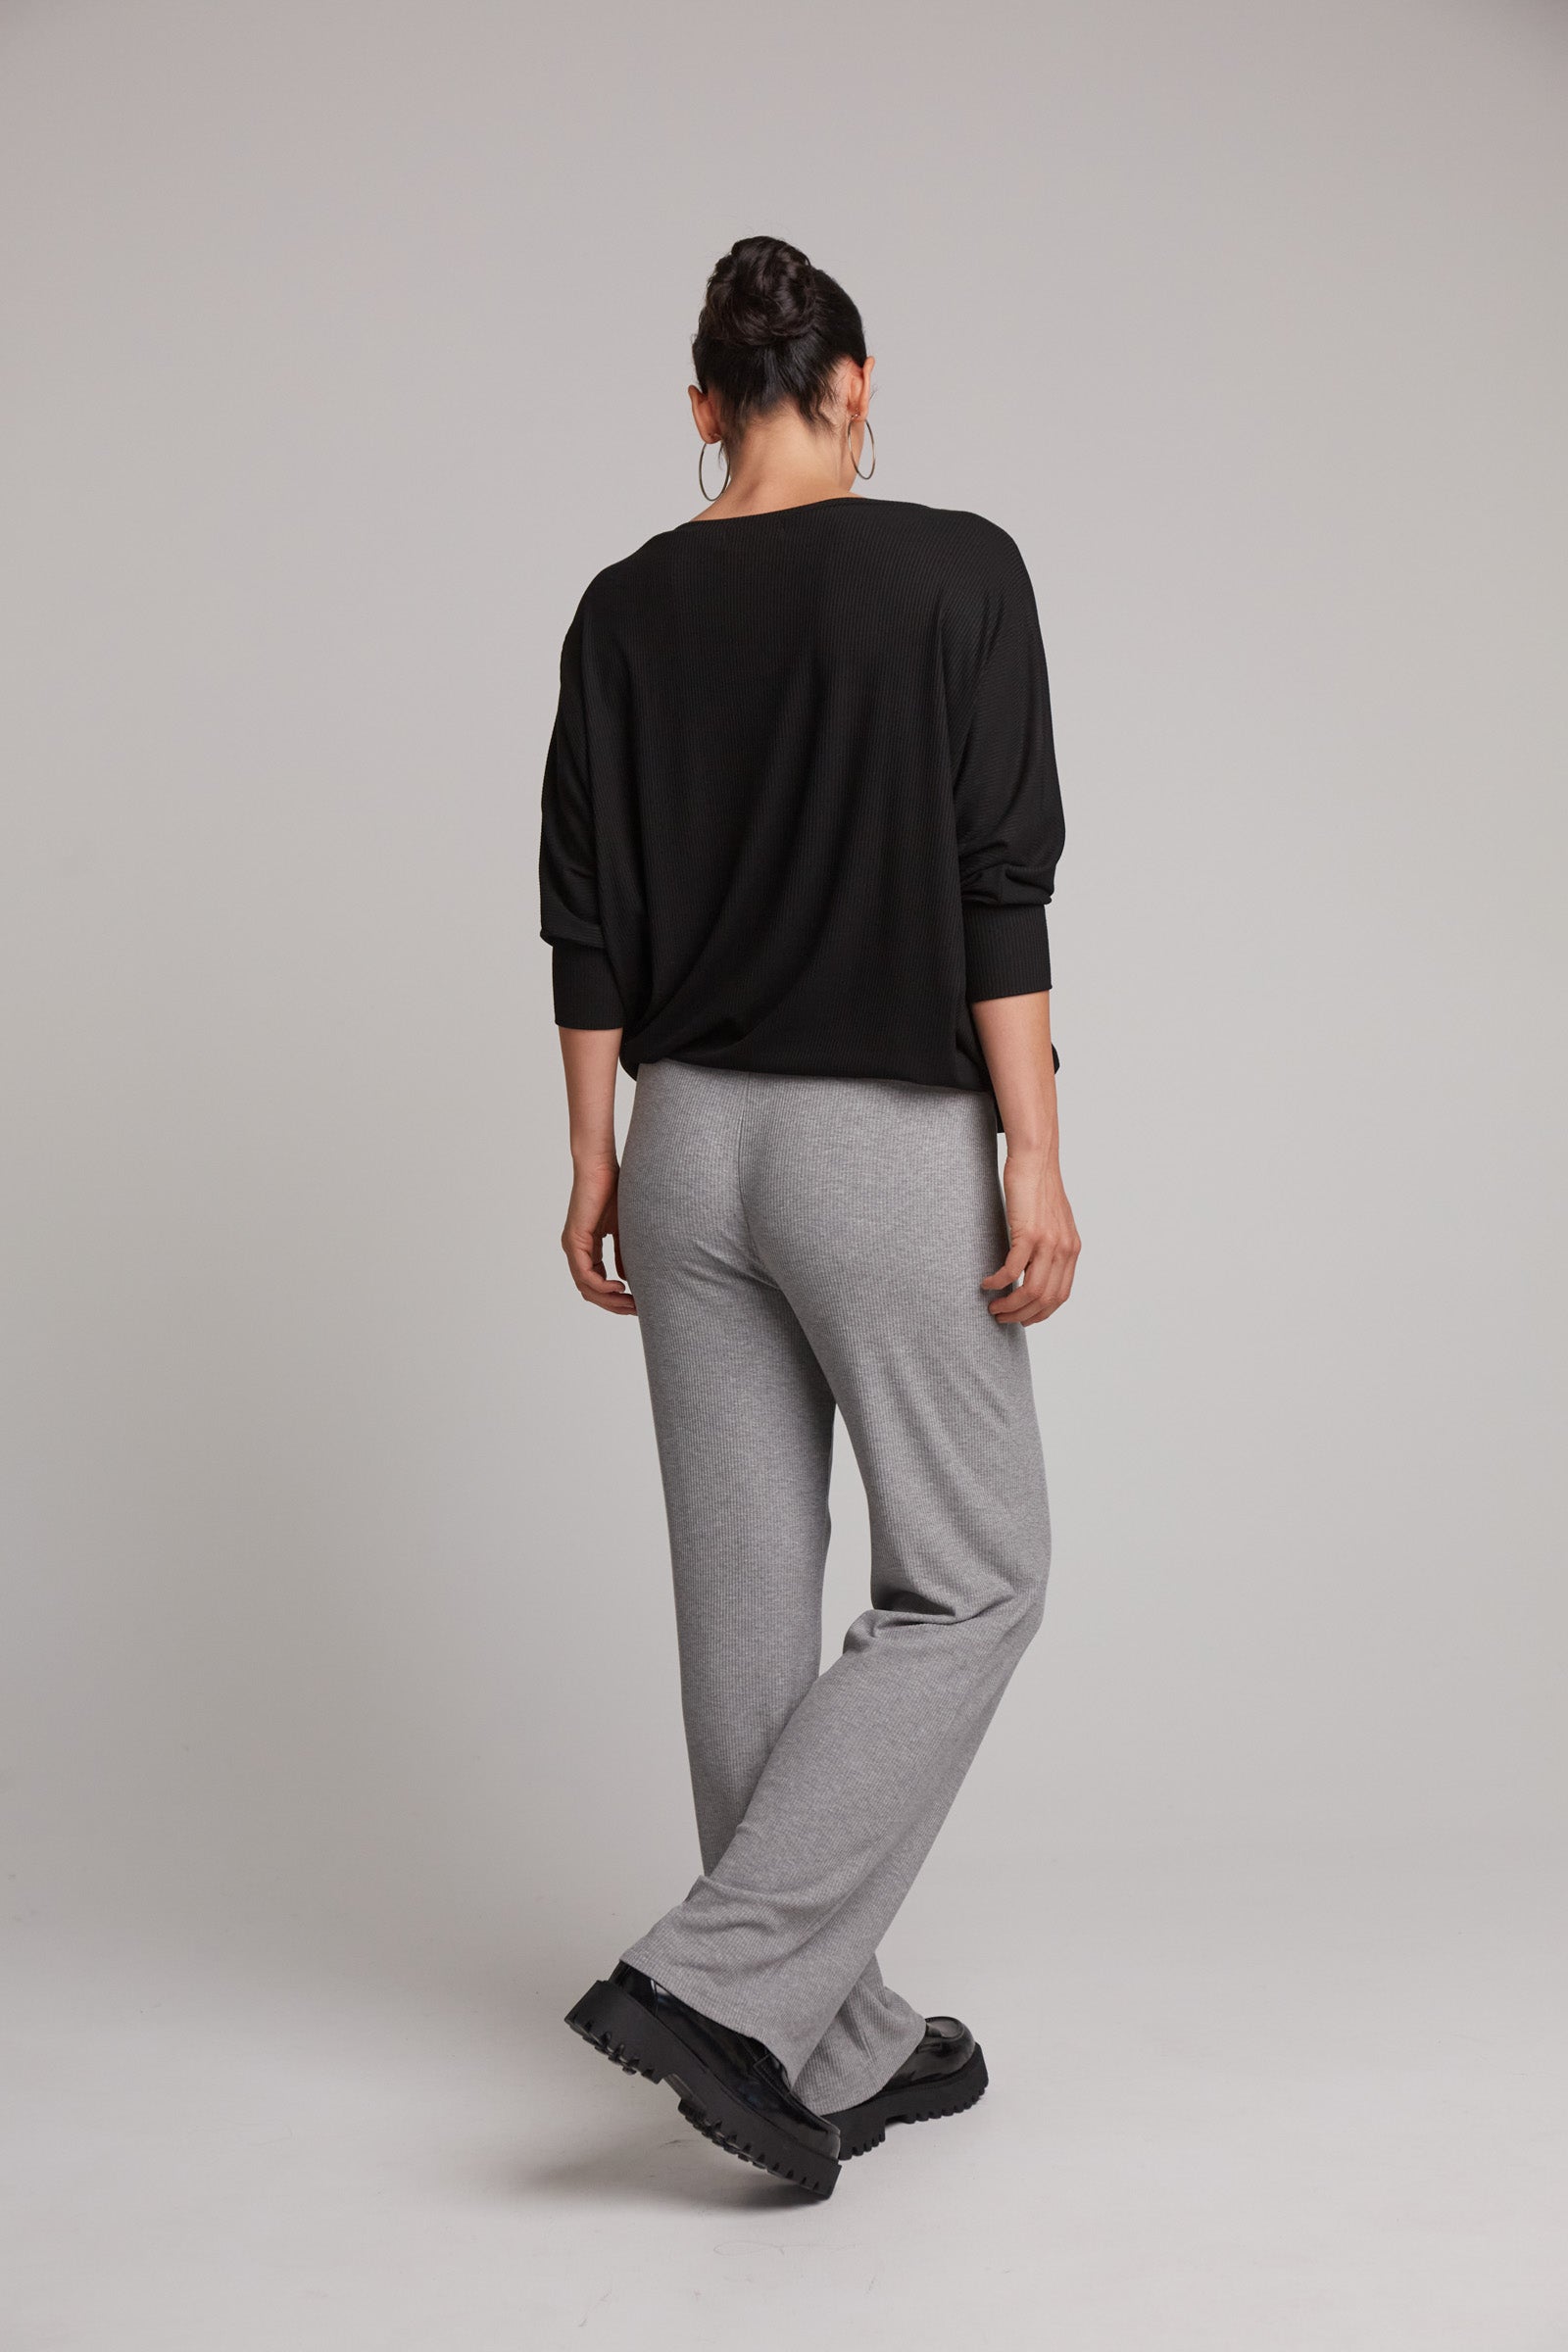 Studio Jersey Pant - Gray - eb&ive Clothing - Pant Relaxed Jersey